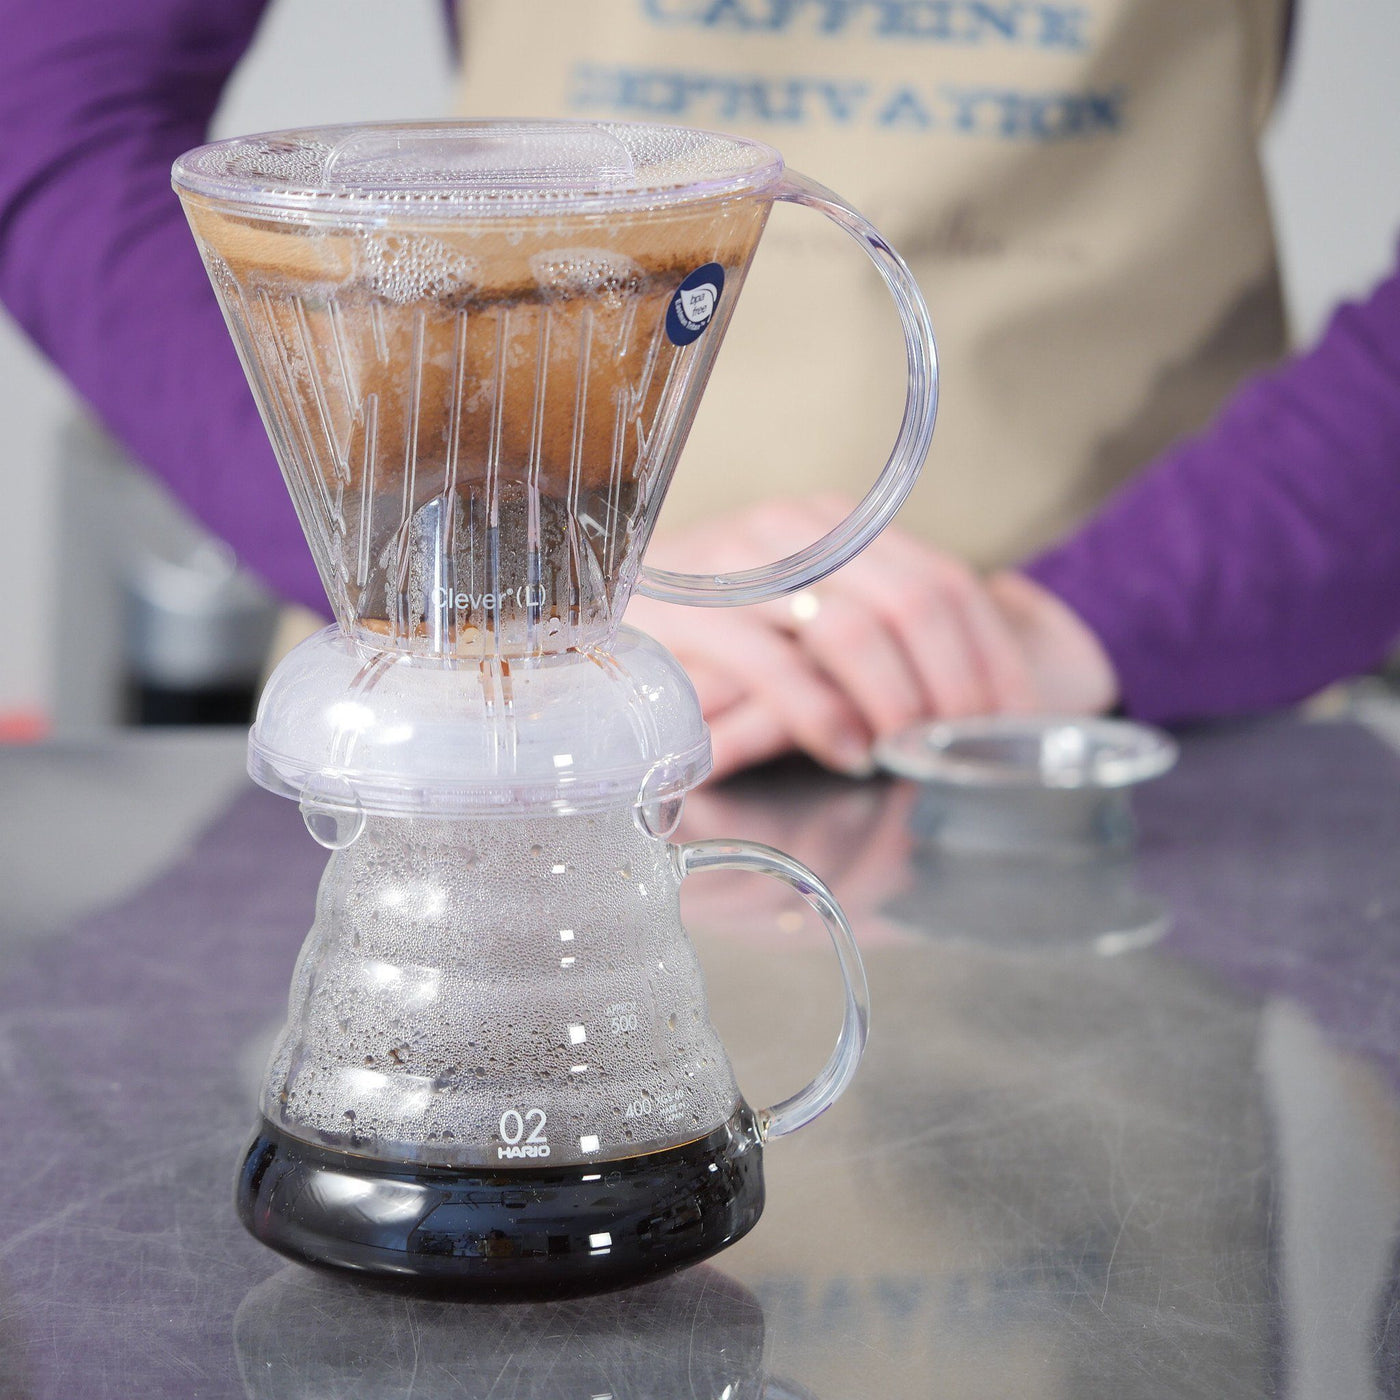 v60 - Advantage of Dual Scale Setups for Pour Over? - Coffee Stack Exchange